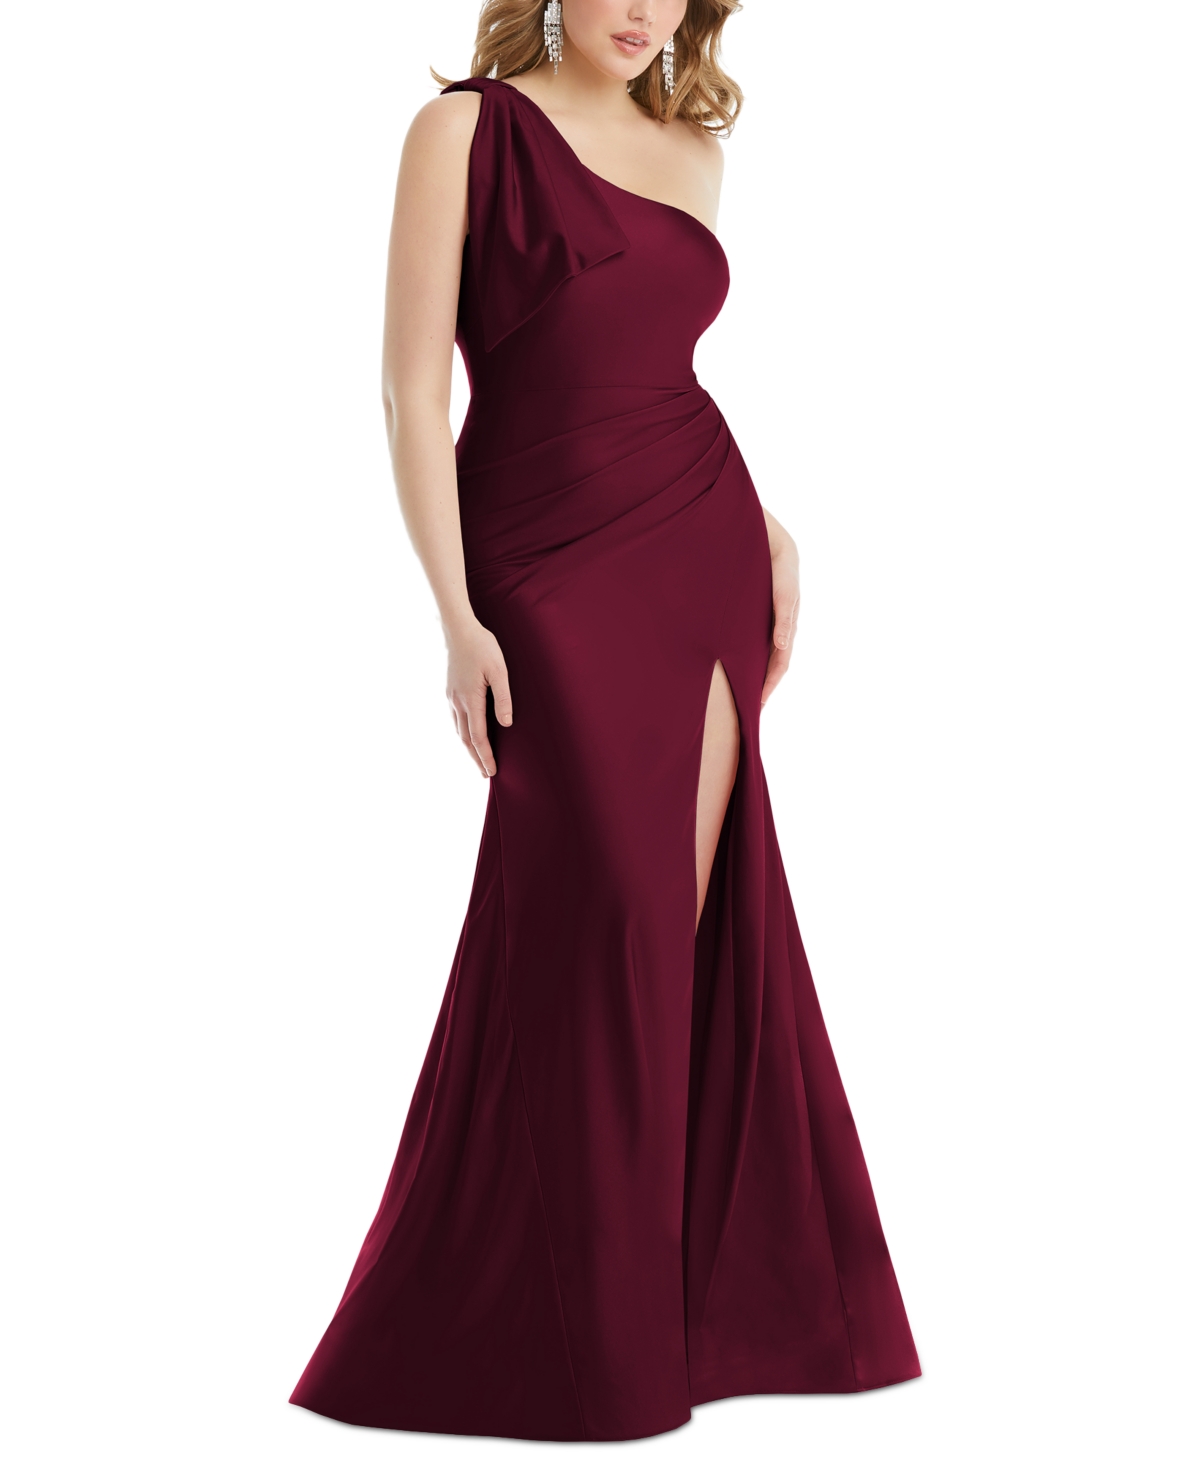 Dessy Collection Women's Bow One-Shoulder Sleeveless Satin Gown